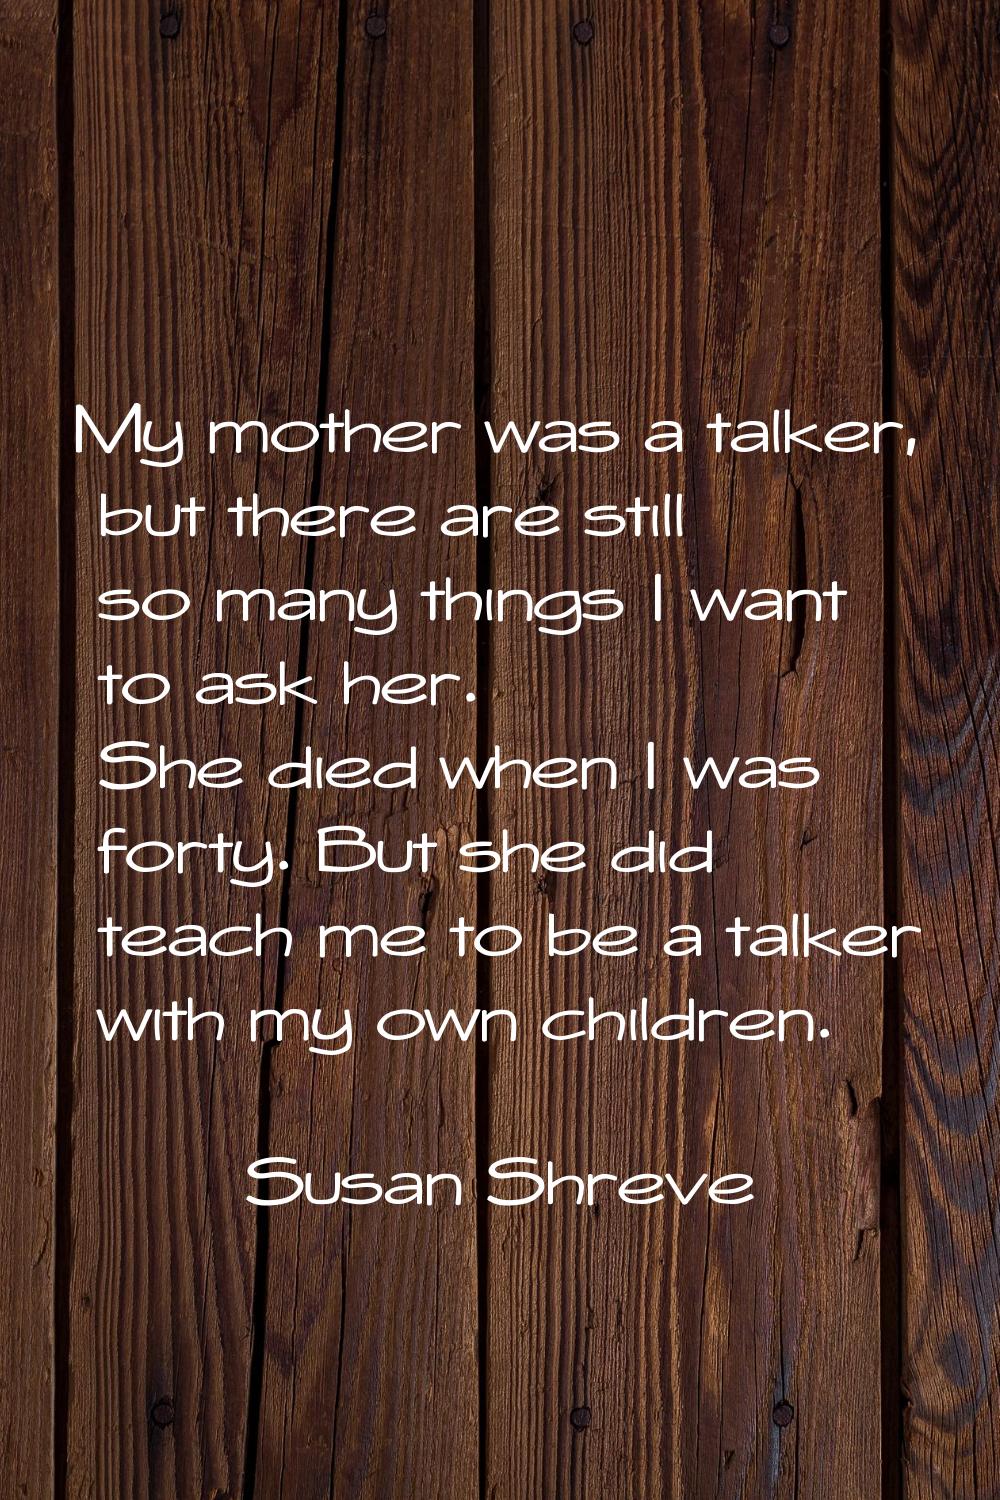 My mother was a talker, but there are still so many things I want to ask her. She died when I was f